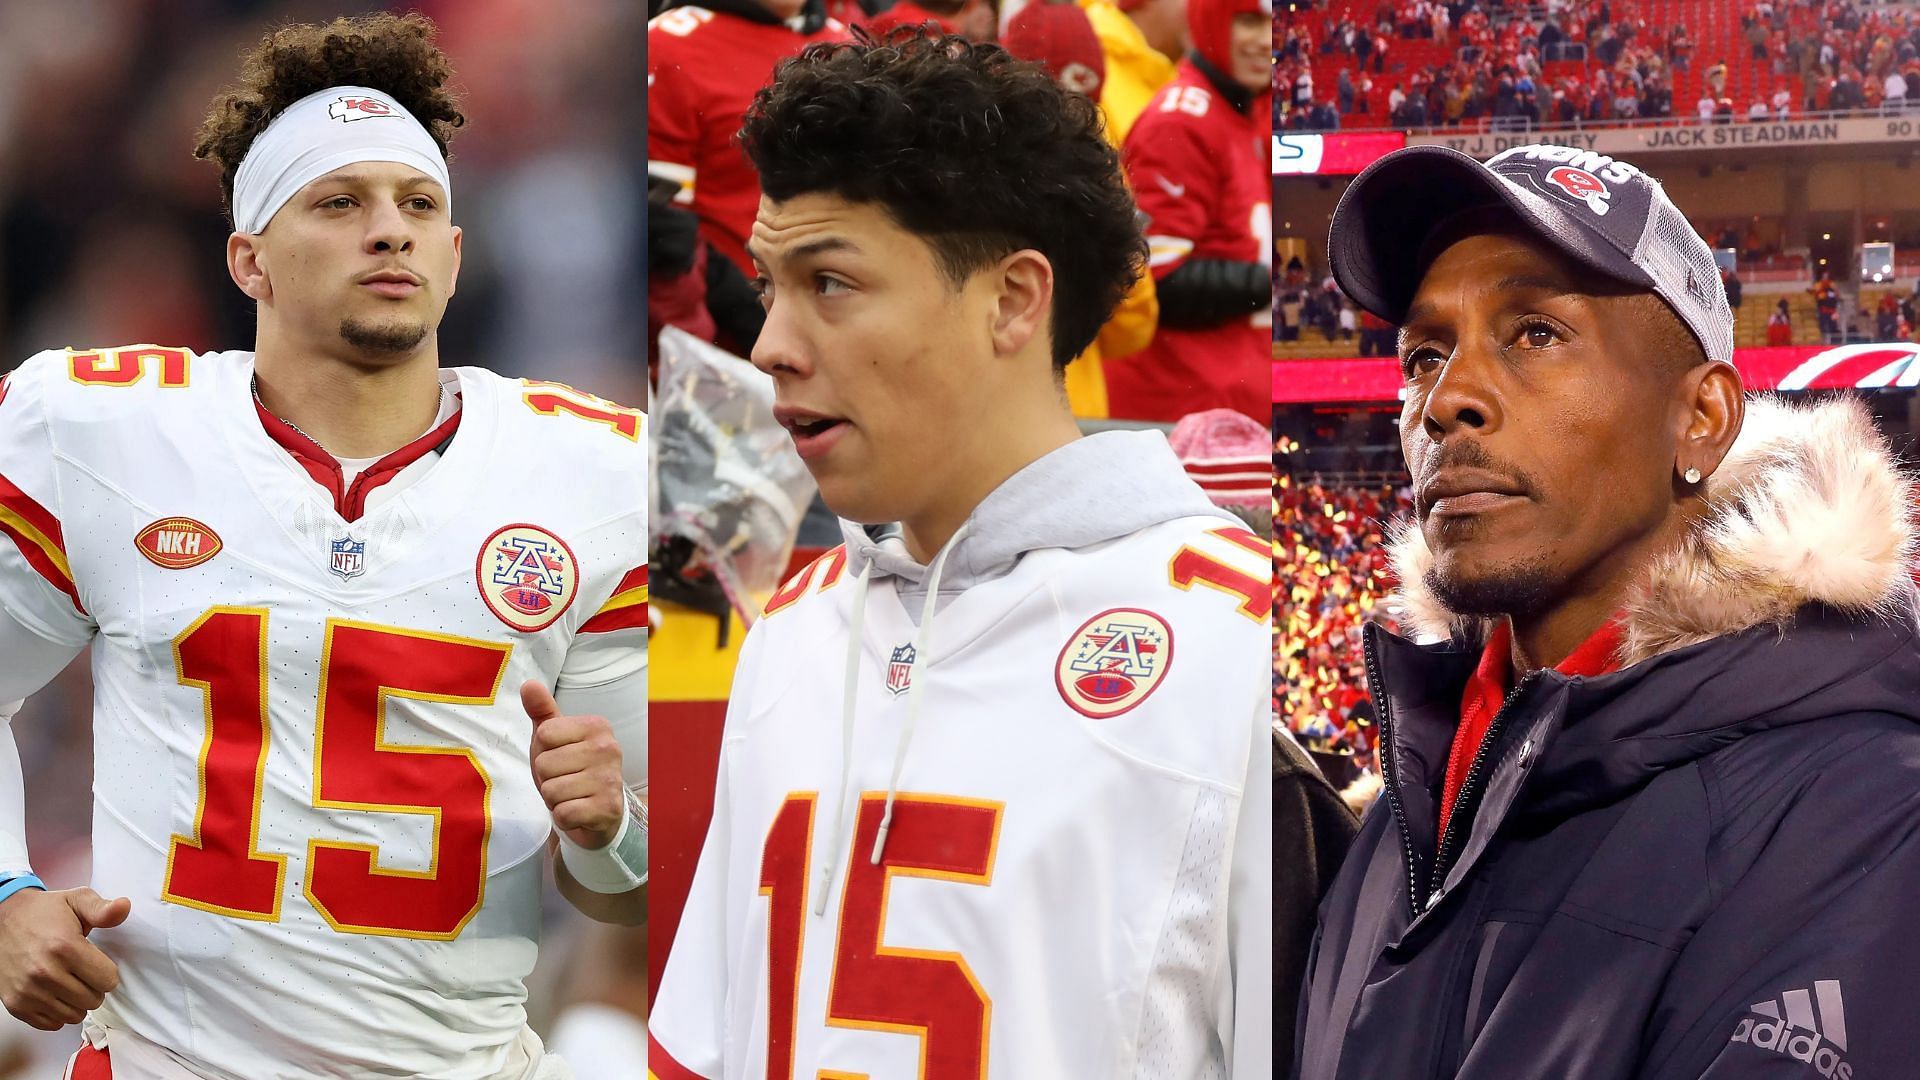 &lsquo;He&rsquo;s got the crazy brother to deal with&rsquo;: Patrick Mahomes&rsquo; family&rsquo;s latest controversy sees 3x Super Bowl champion pick sides